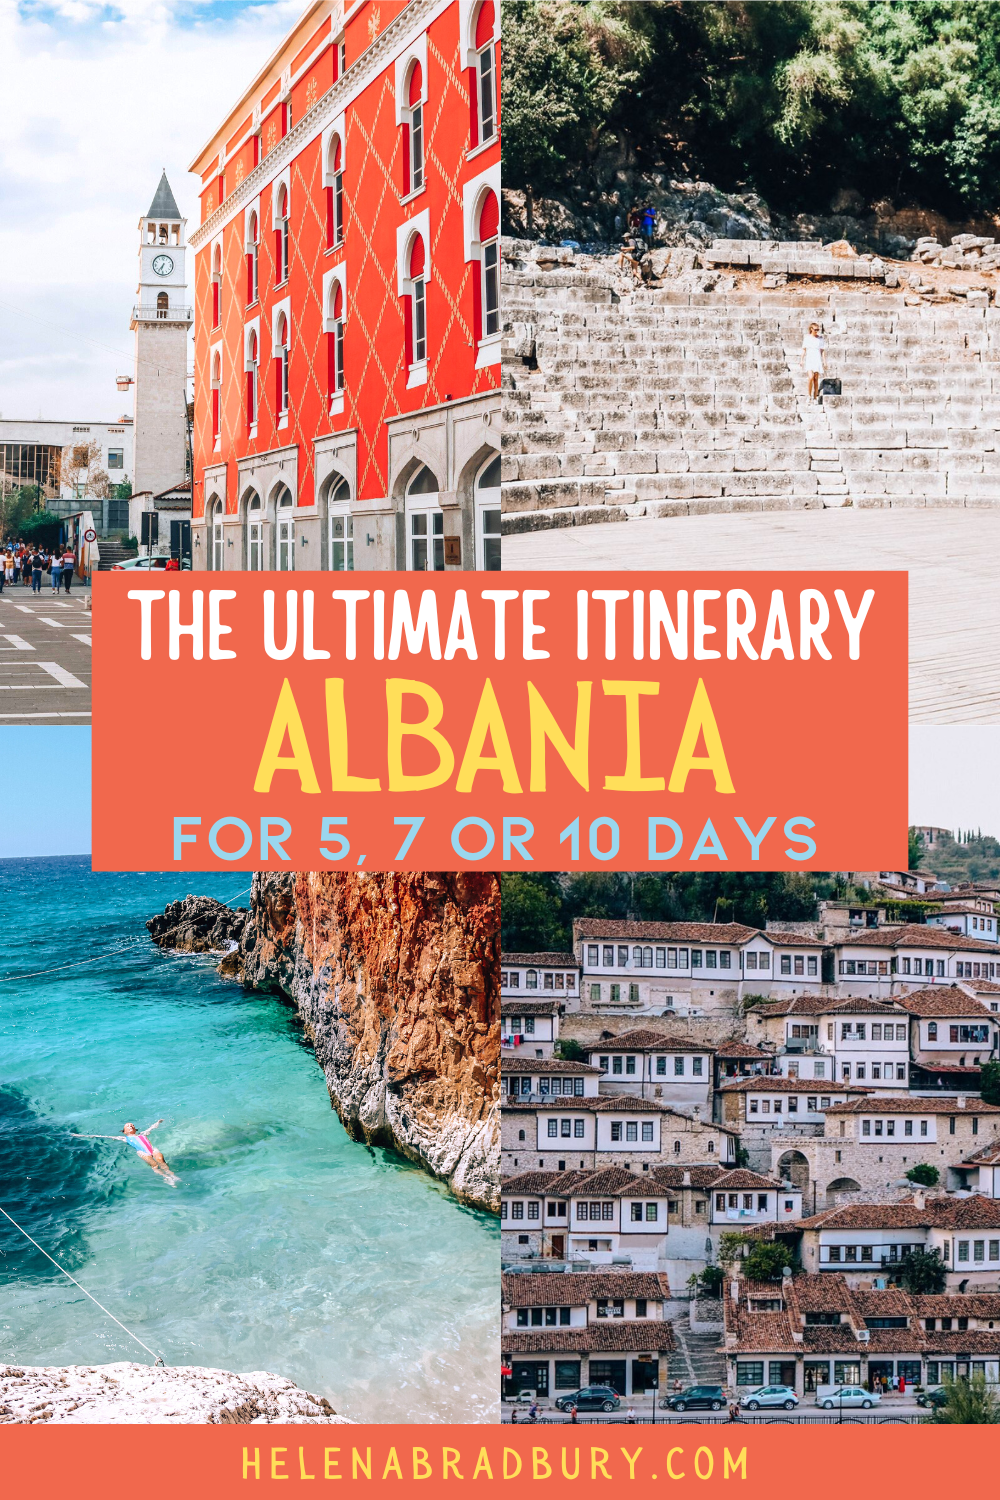 Albania Vacations and Tours